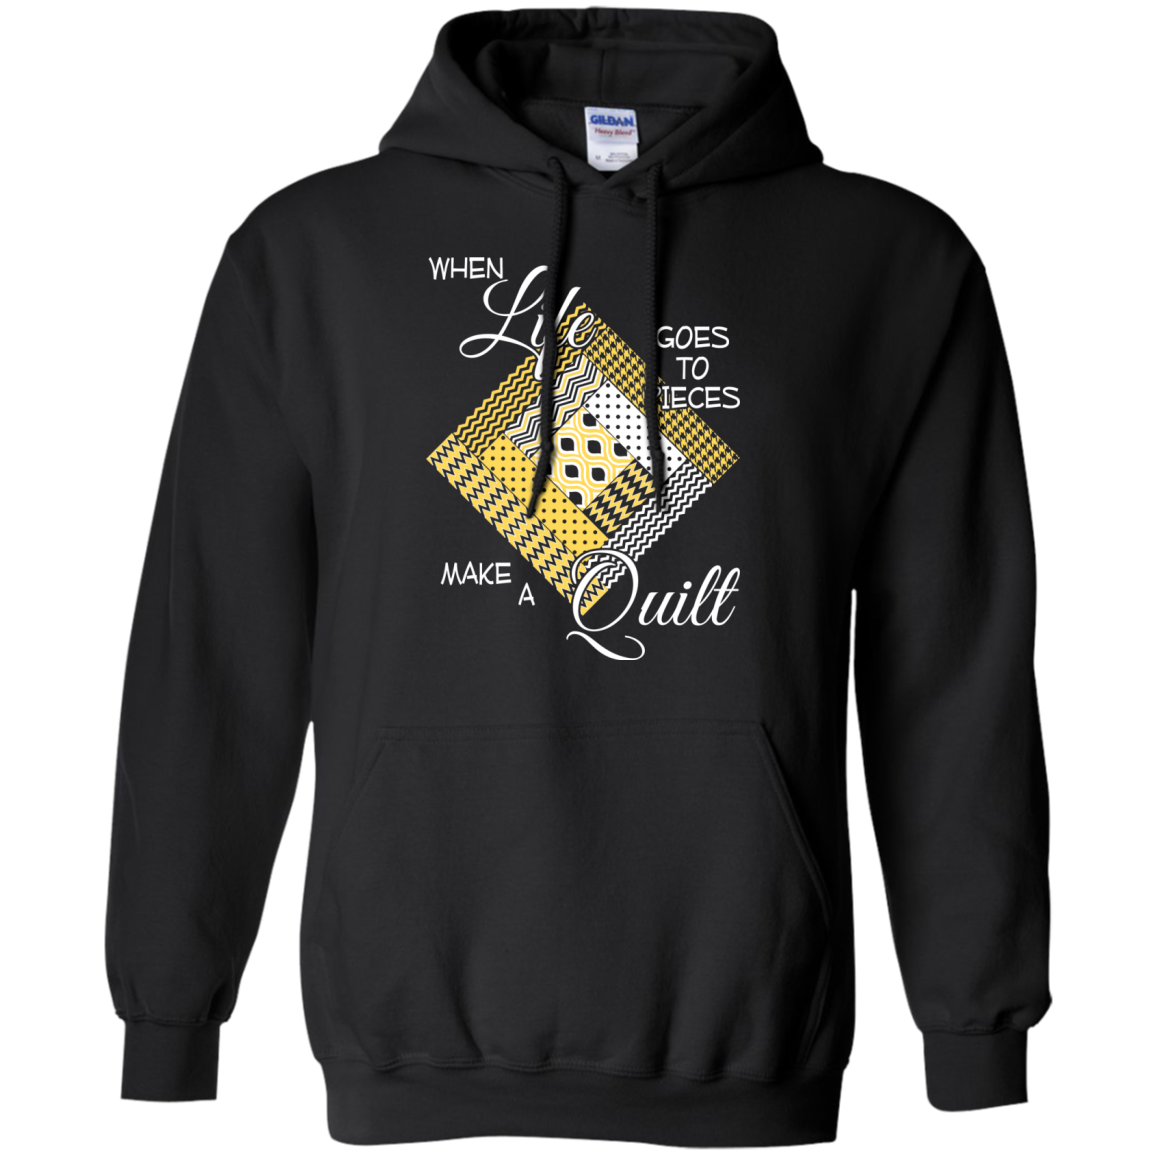 Make a Quilt (yellow) Pullover Hoodies - Crafter4Life - 2